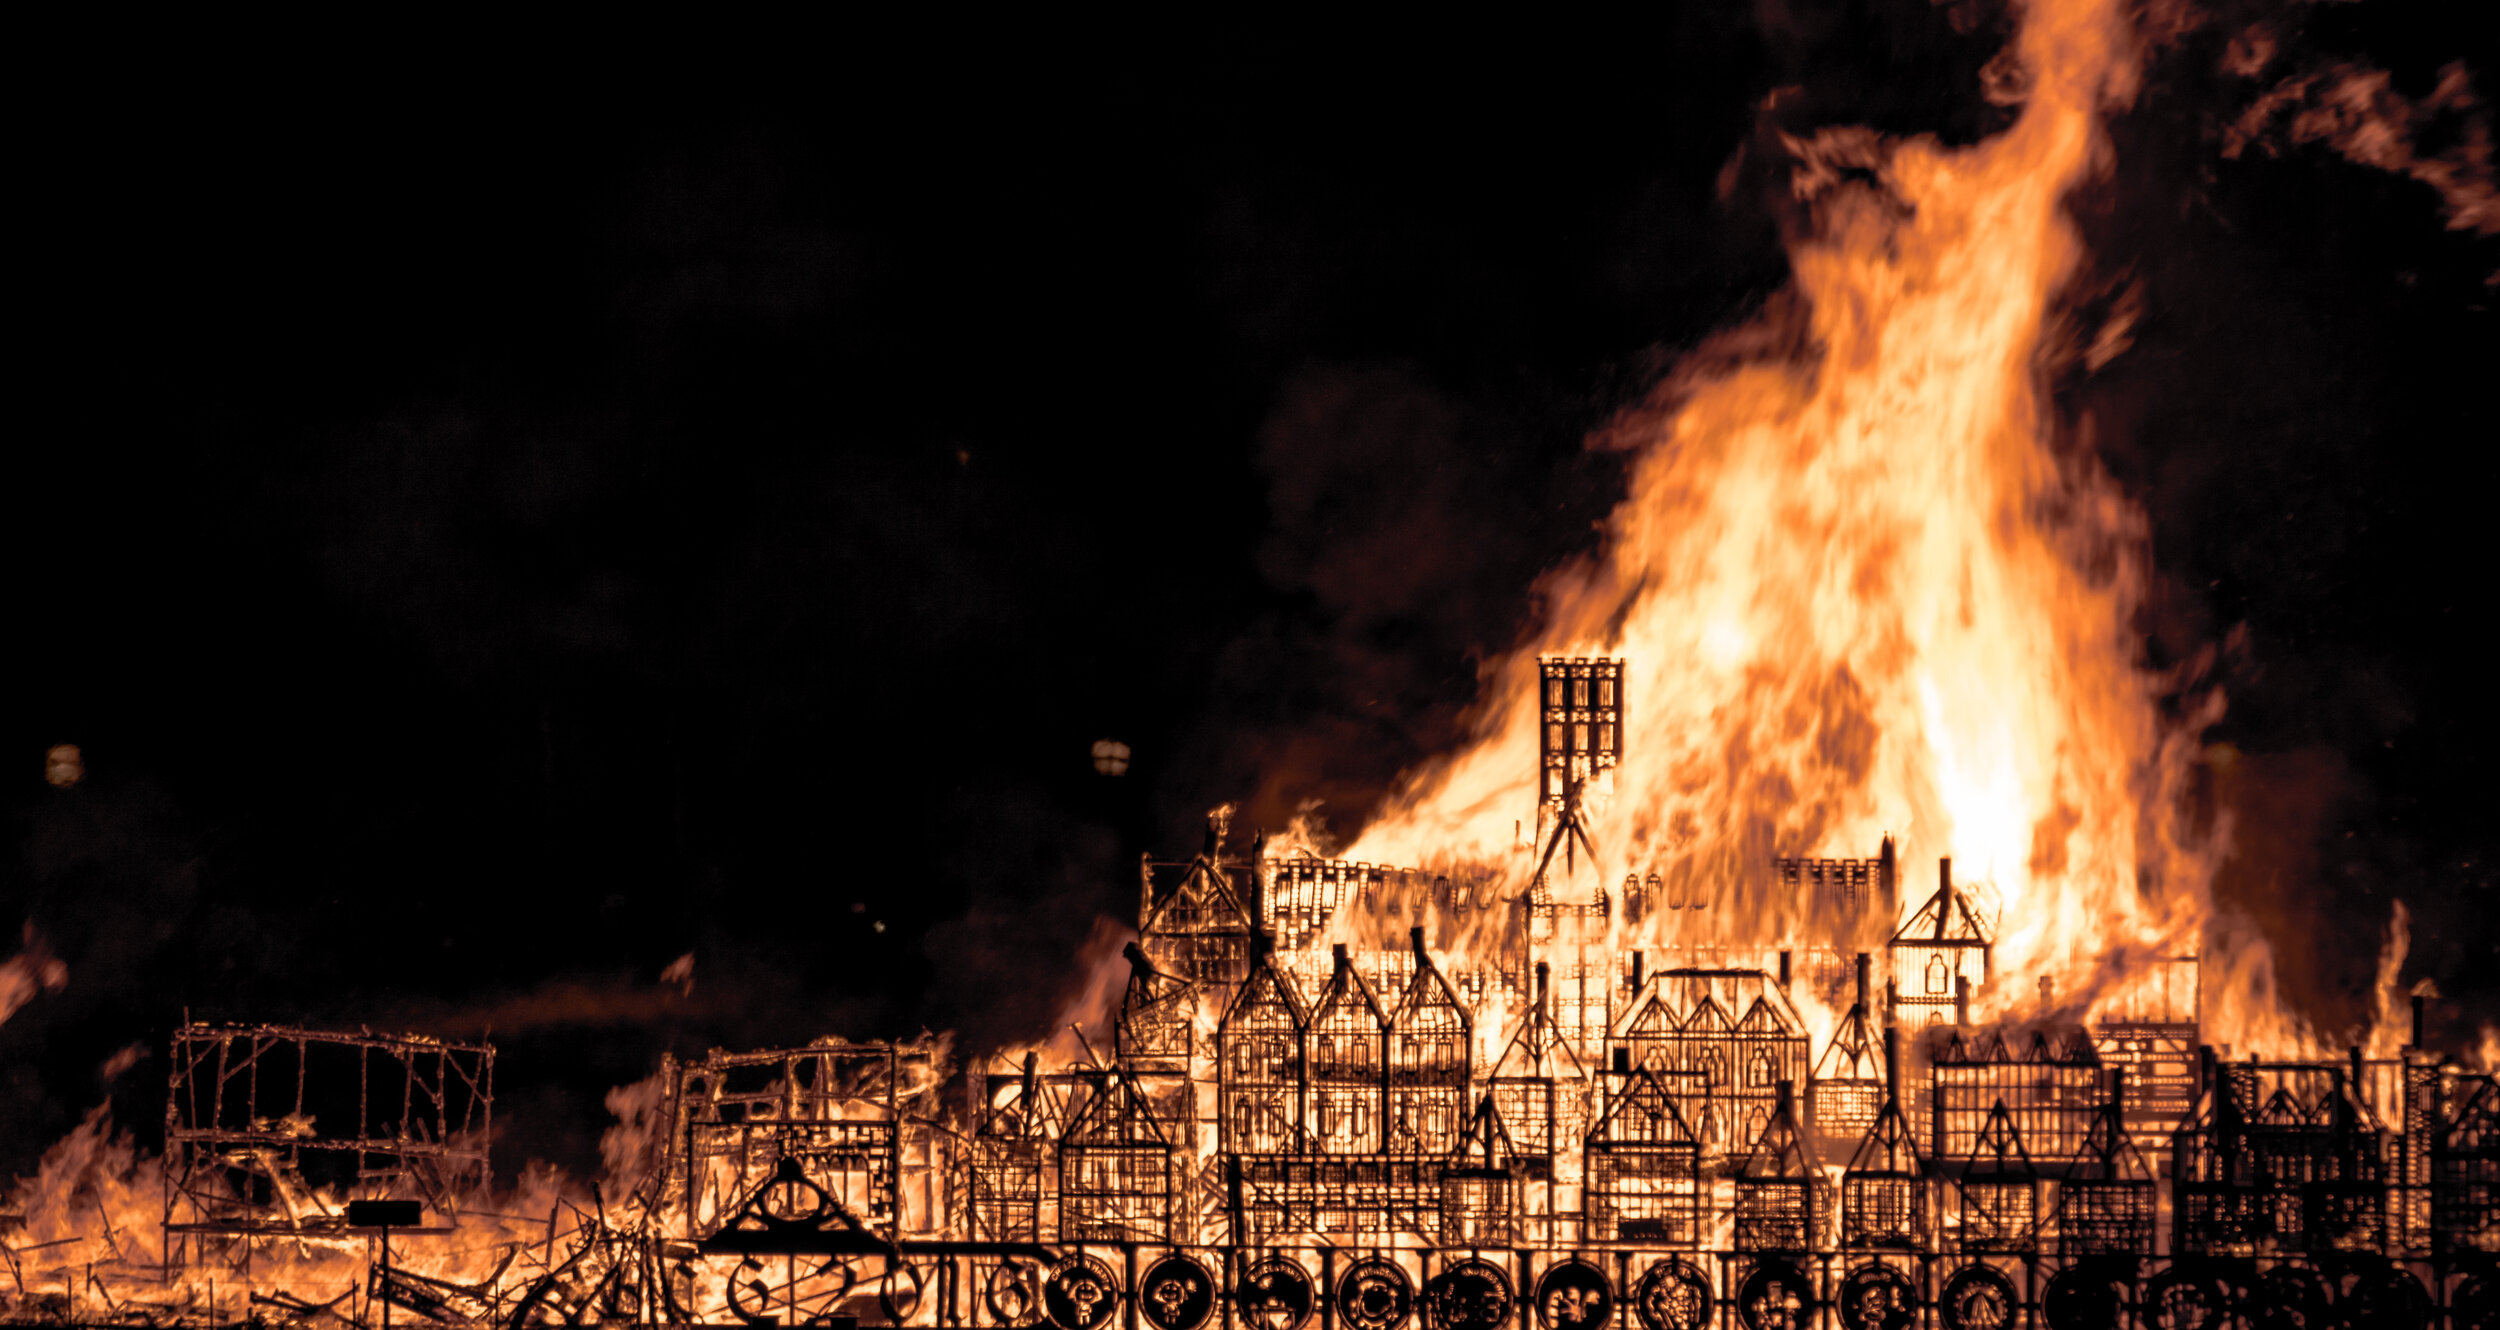  The anniversary of the 1666 great fire of London 